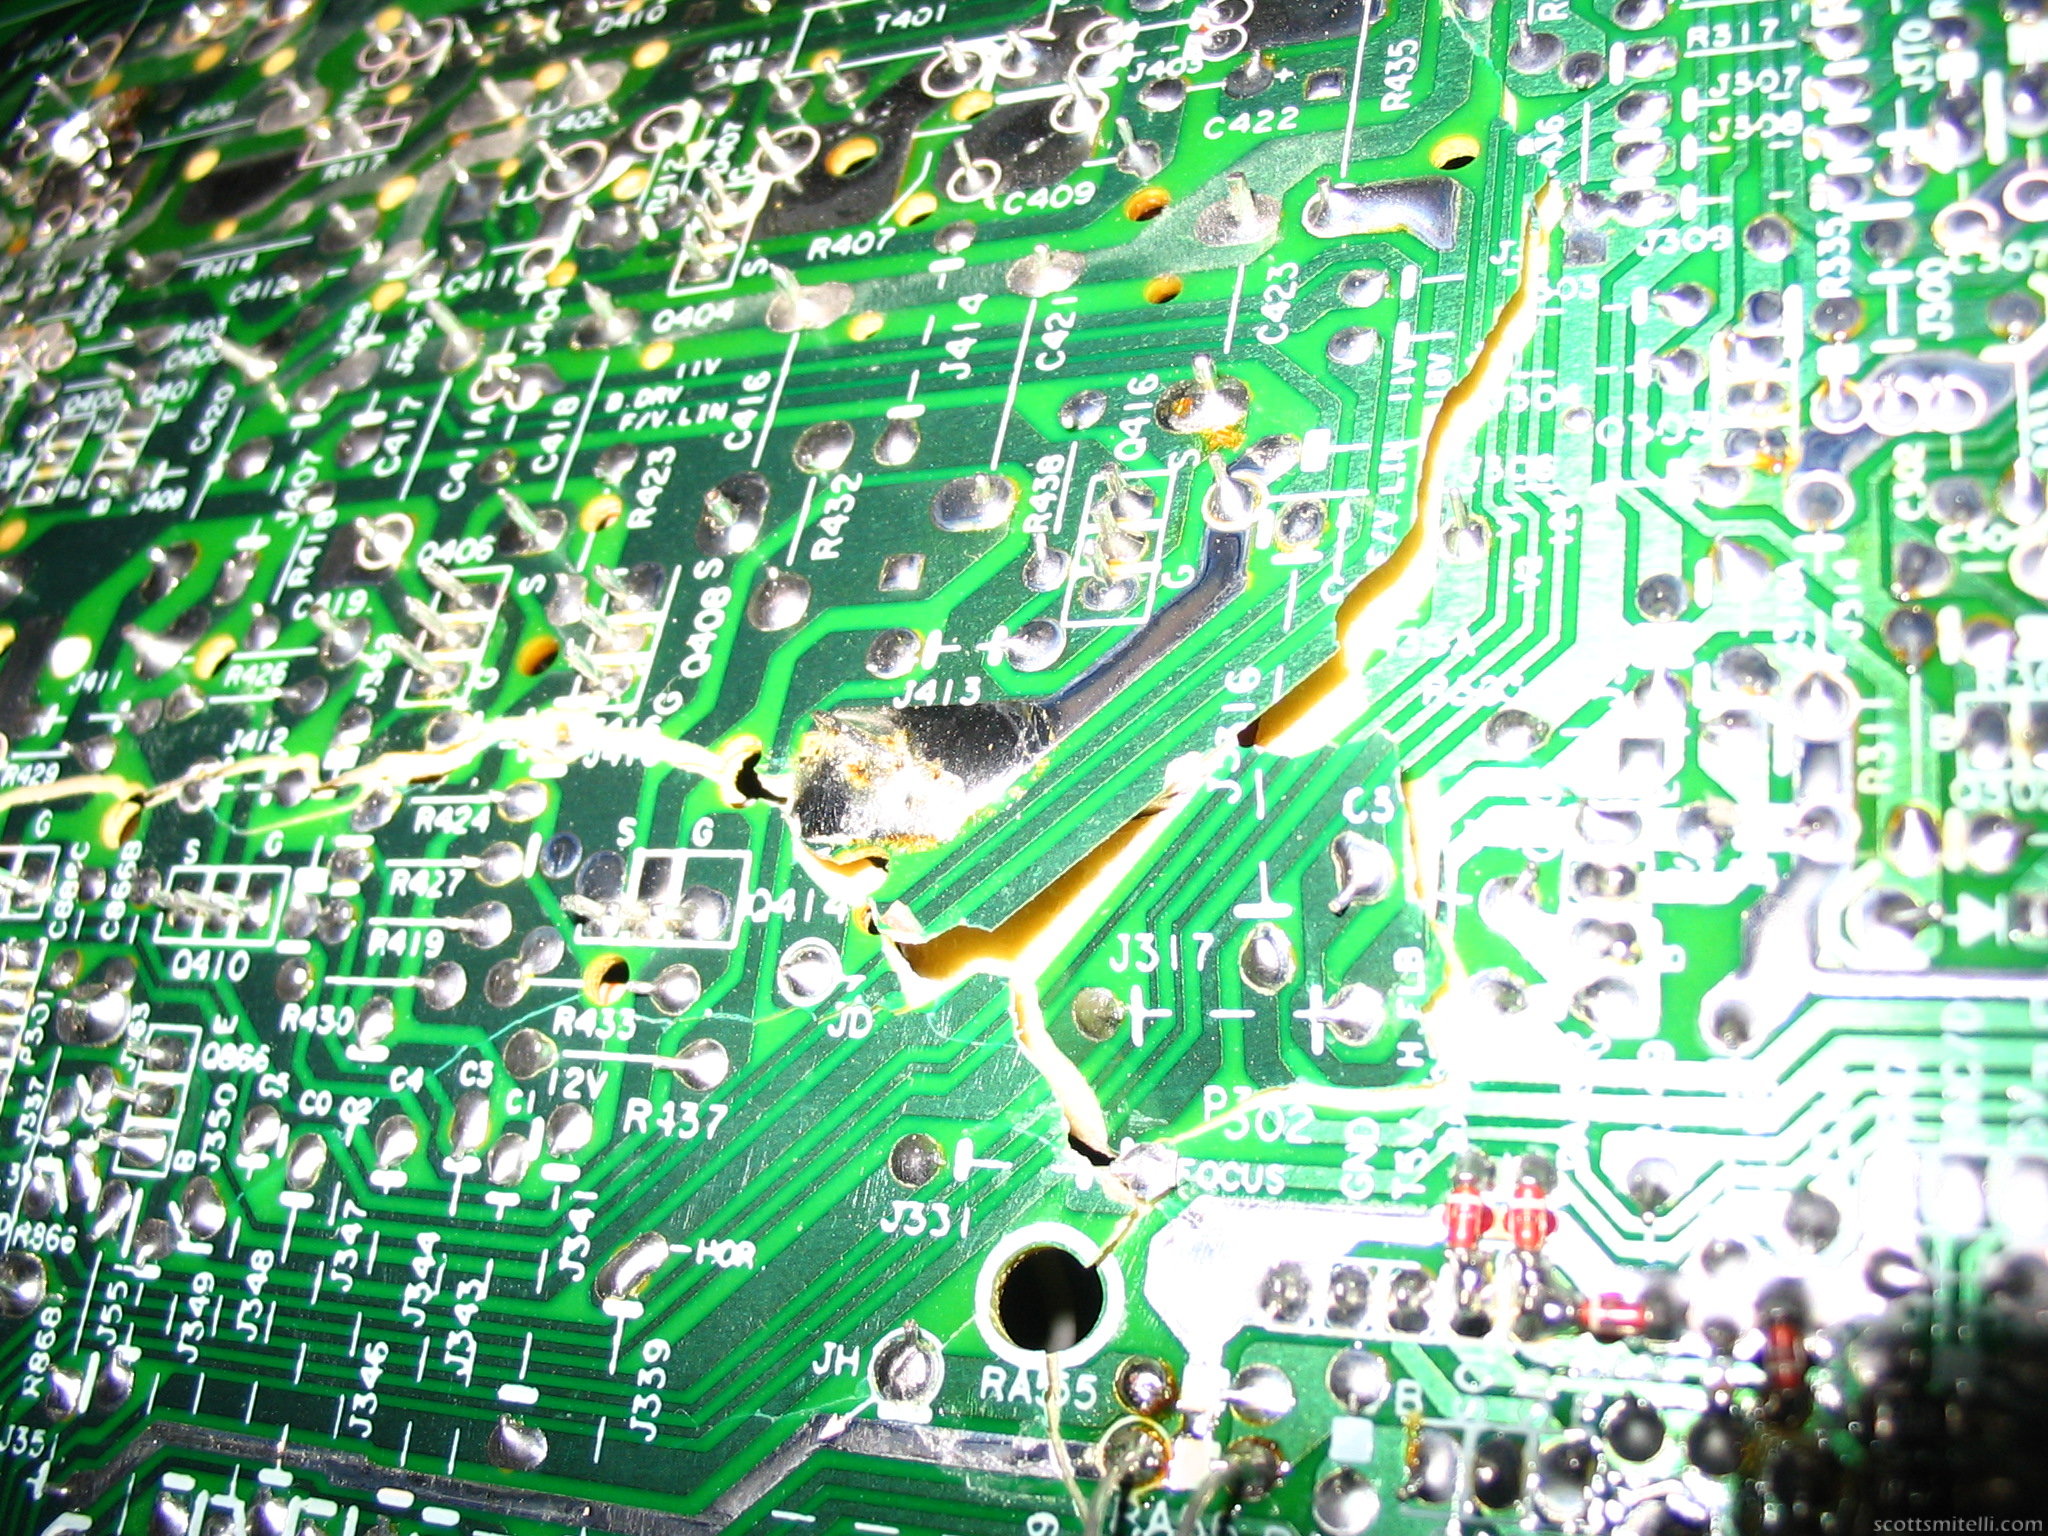 Gaping crack on the solder side of the main board